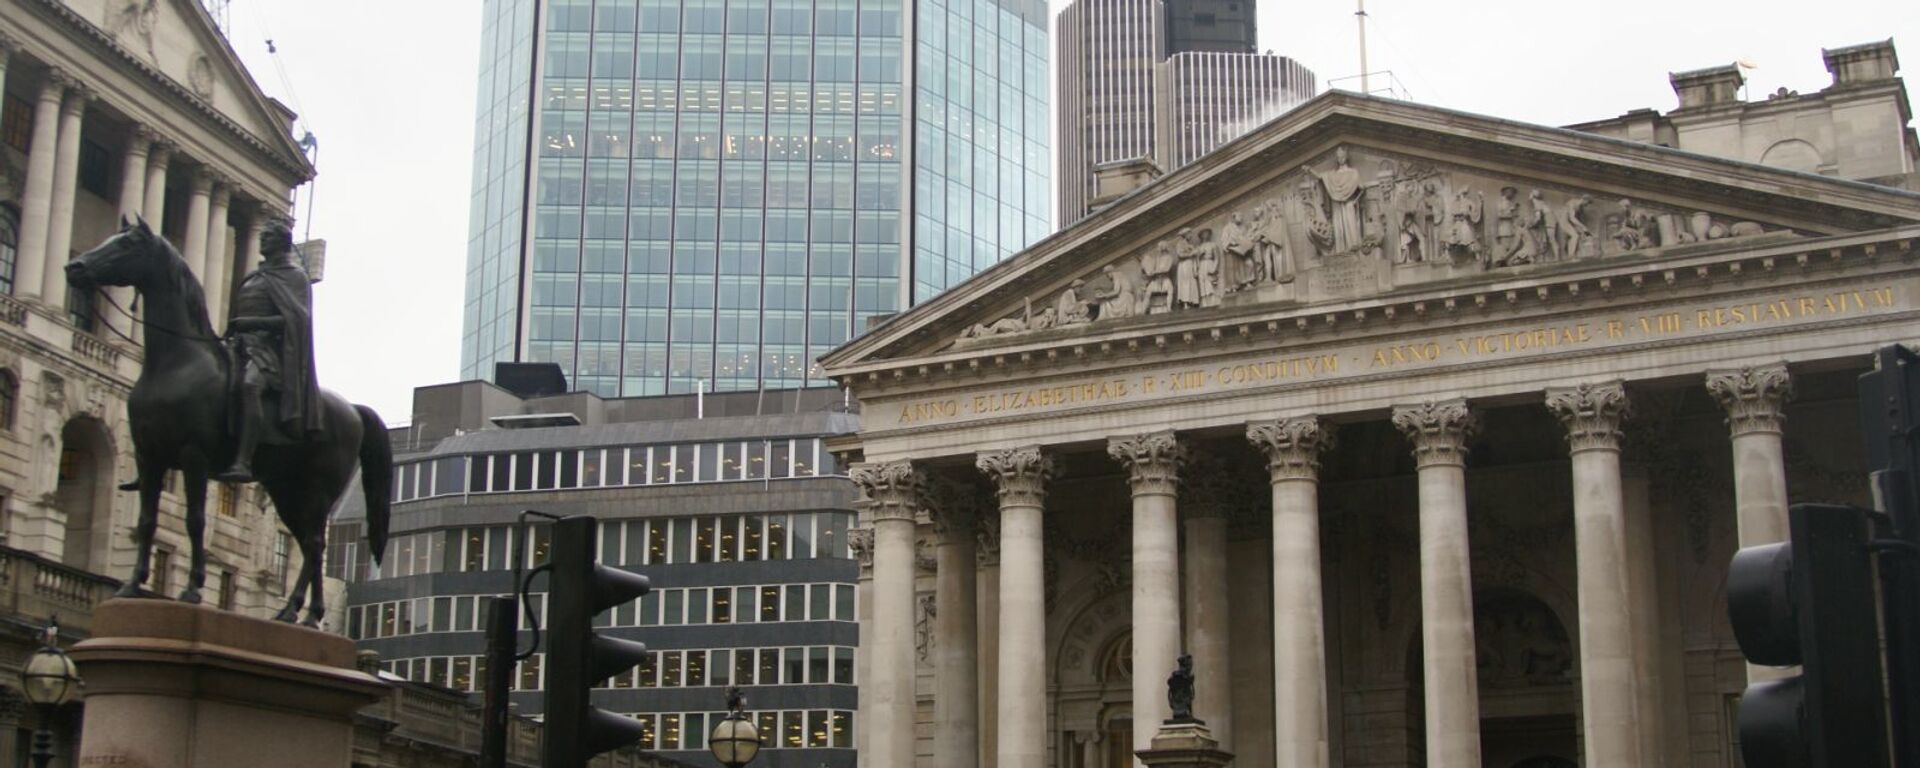 London Stock Exchange Tower and the Bank of England to the left - Sputnik International, 1920, 05.05.2022